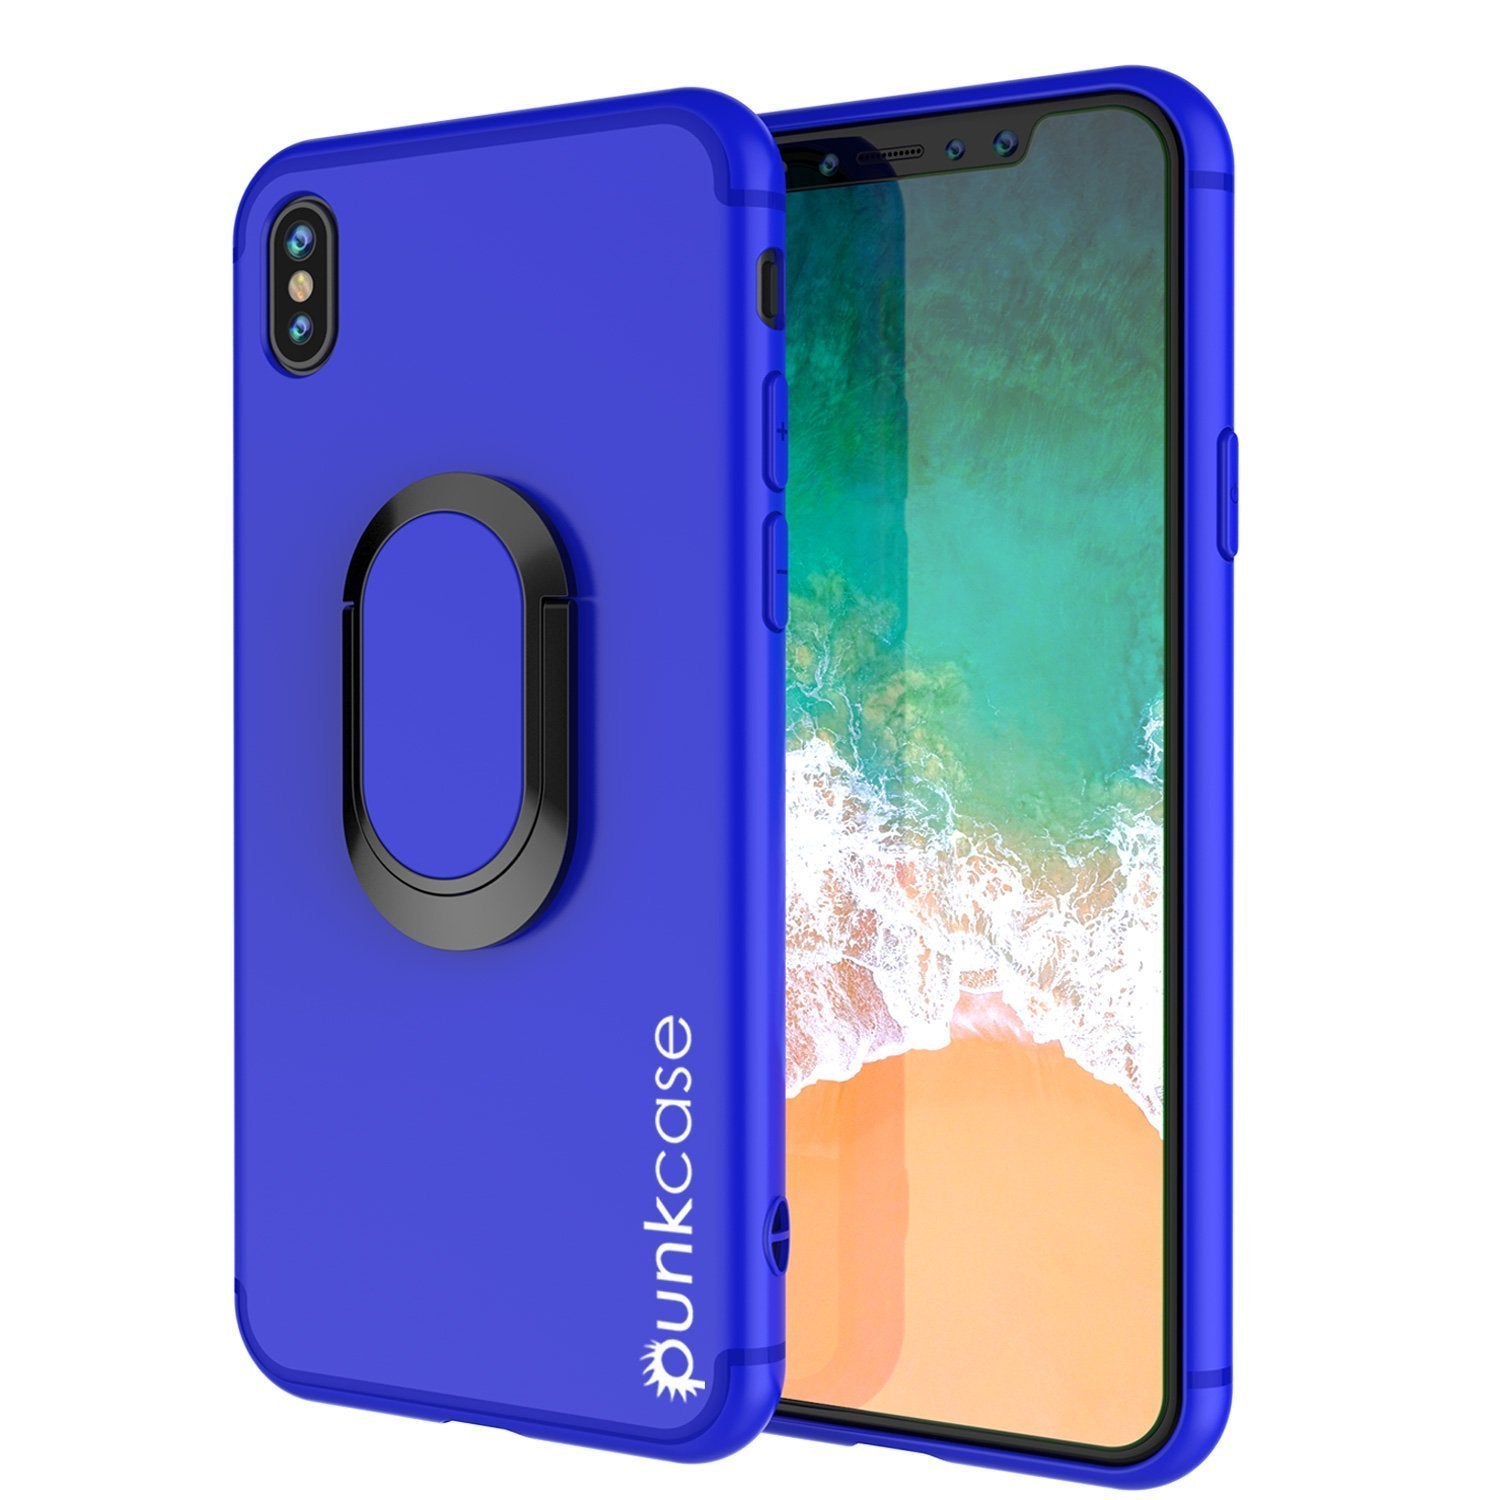 iPhone X Case, Punkcase Magnetix Protective TPU Cover W/ Kickstand, Tempered Glass Screen Protector [Blue]